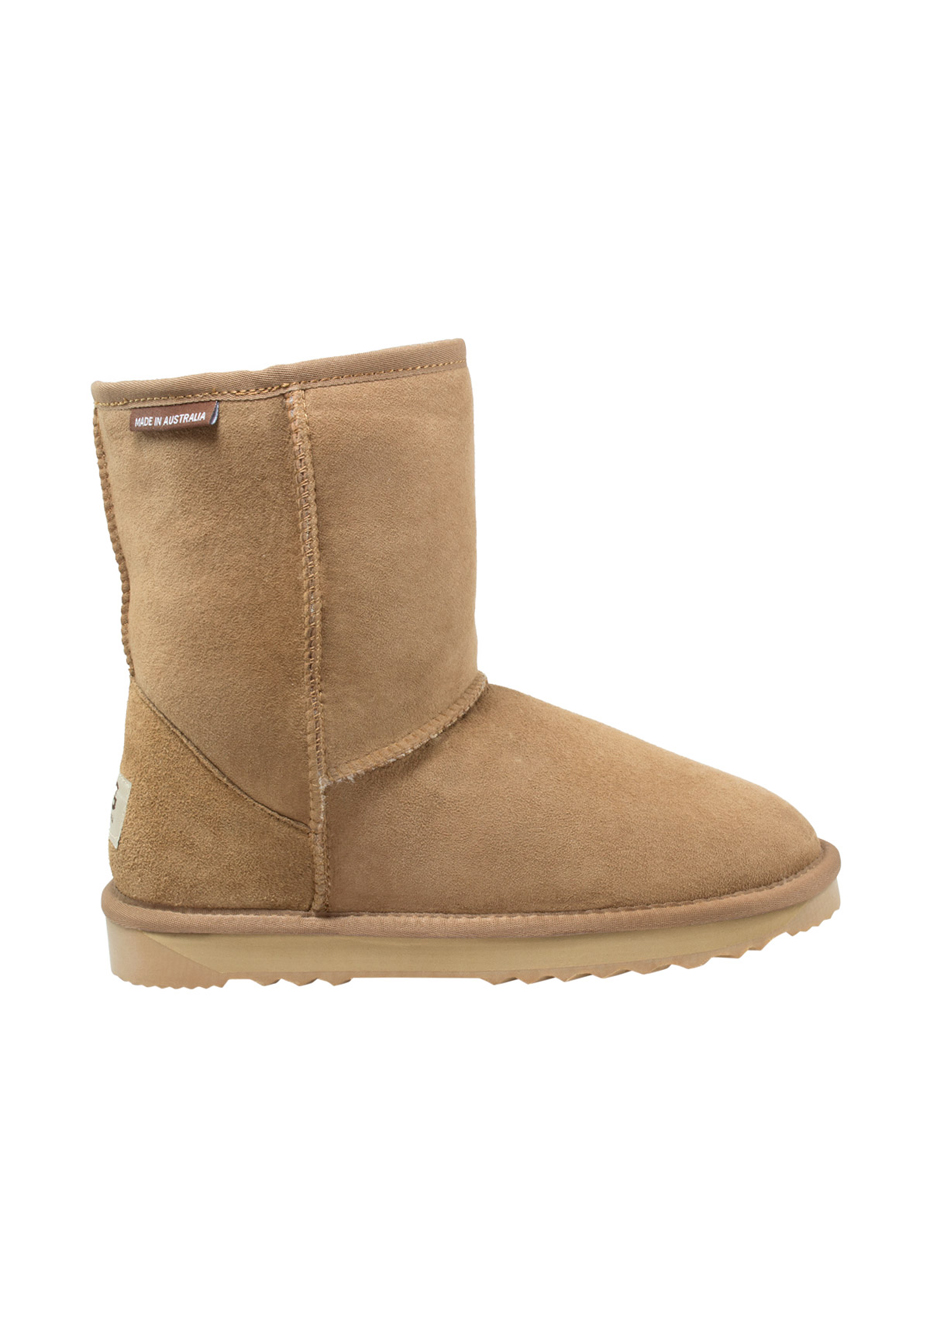 are uggs made out of kangaroo